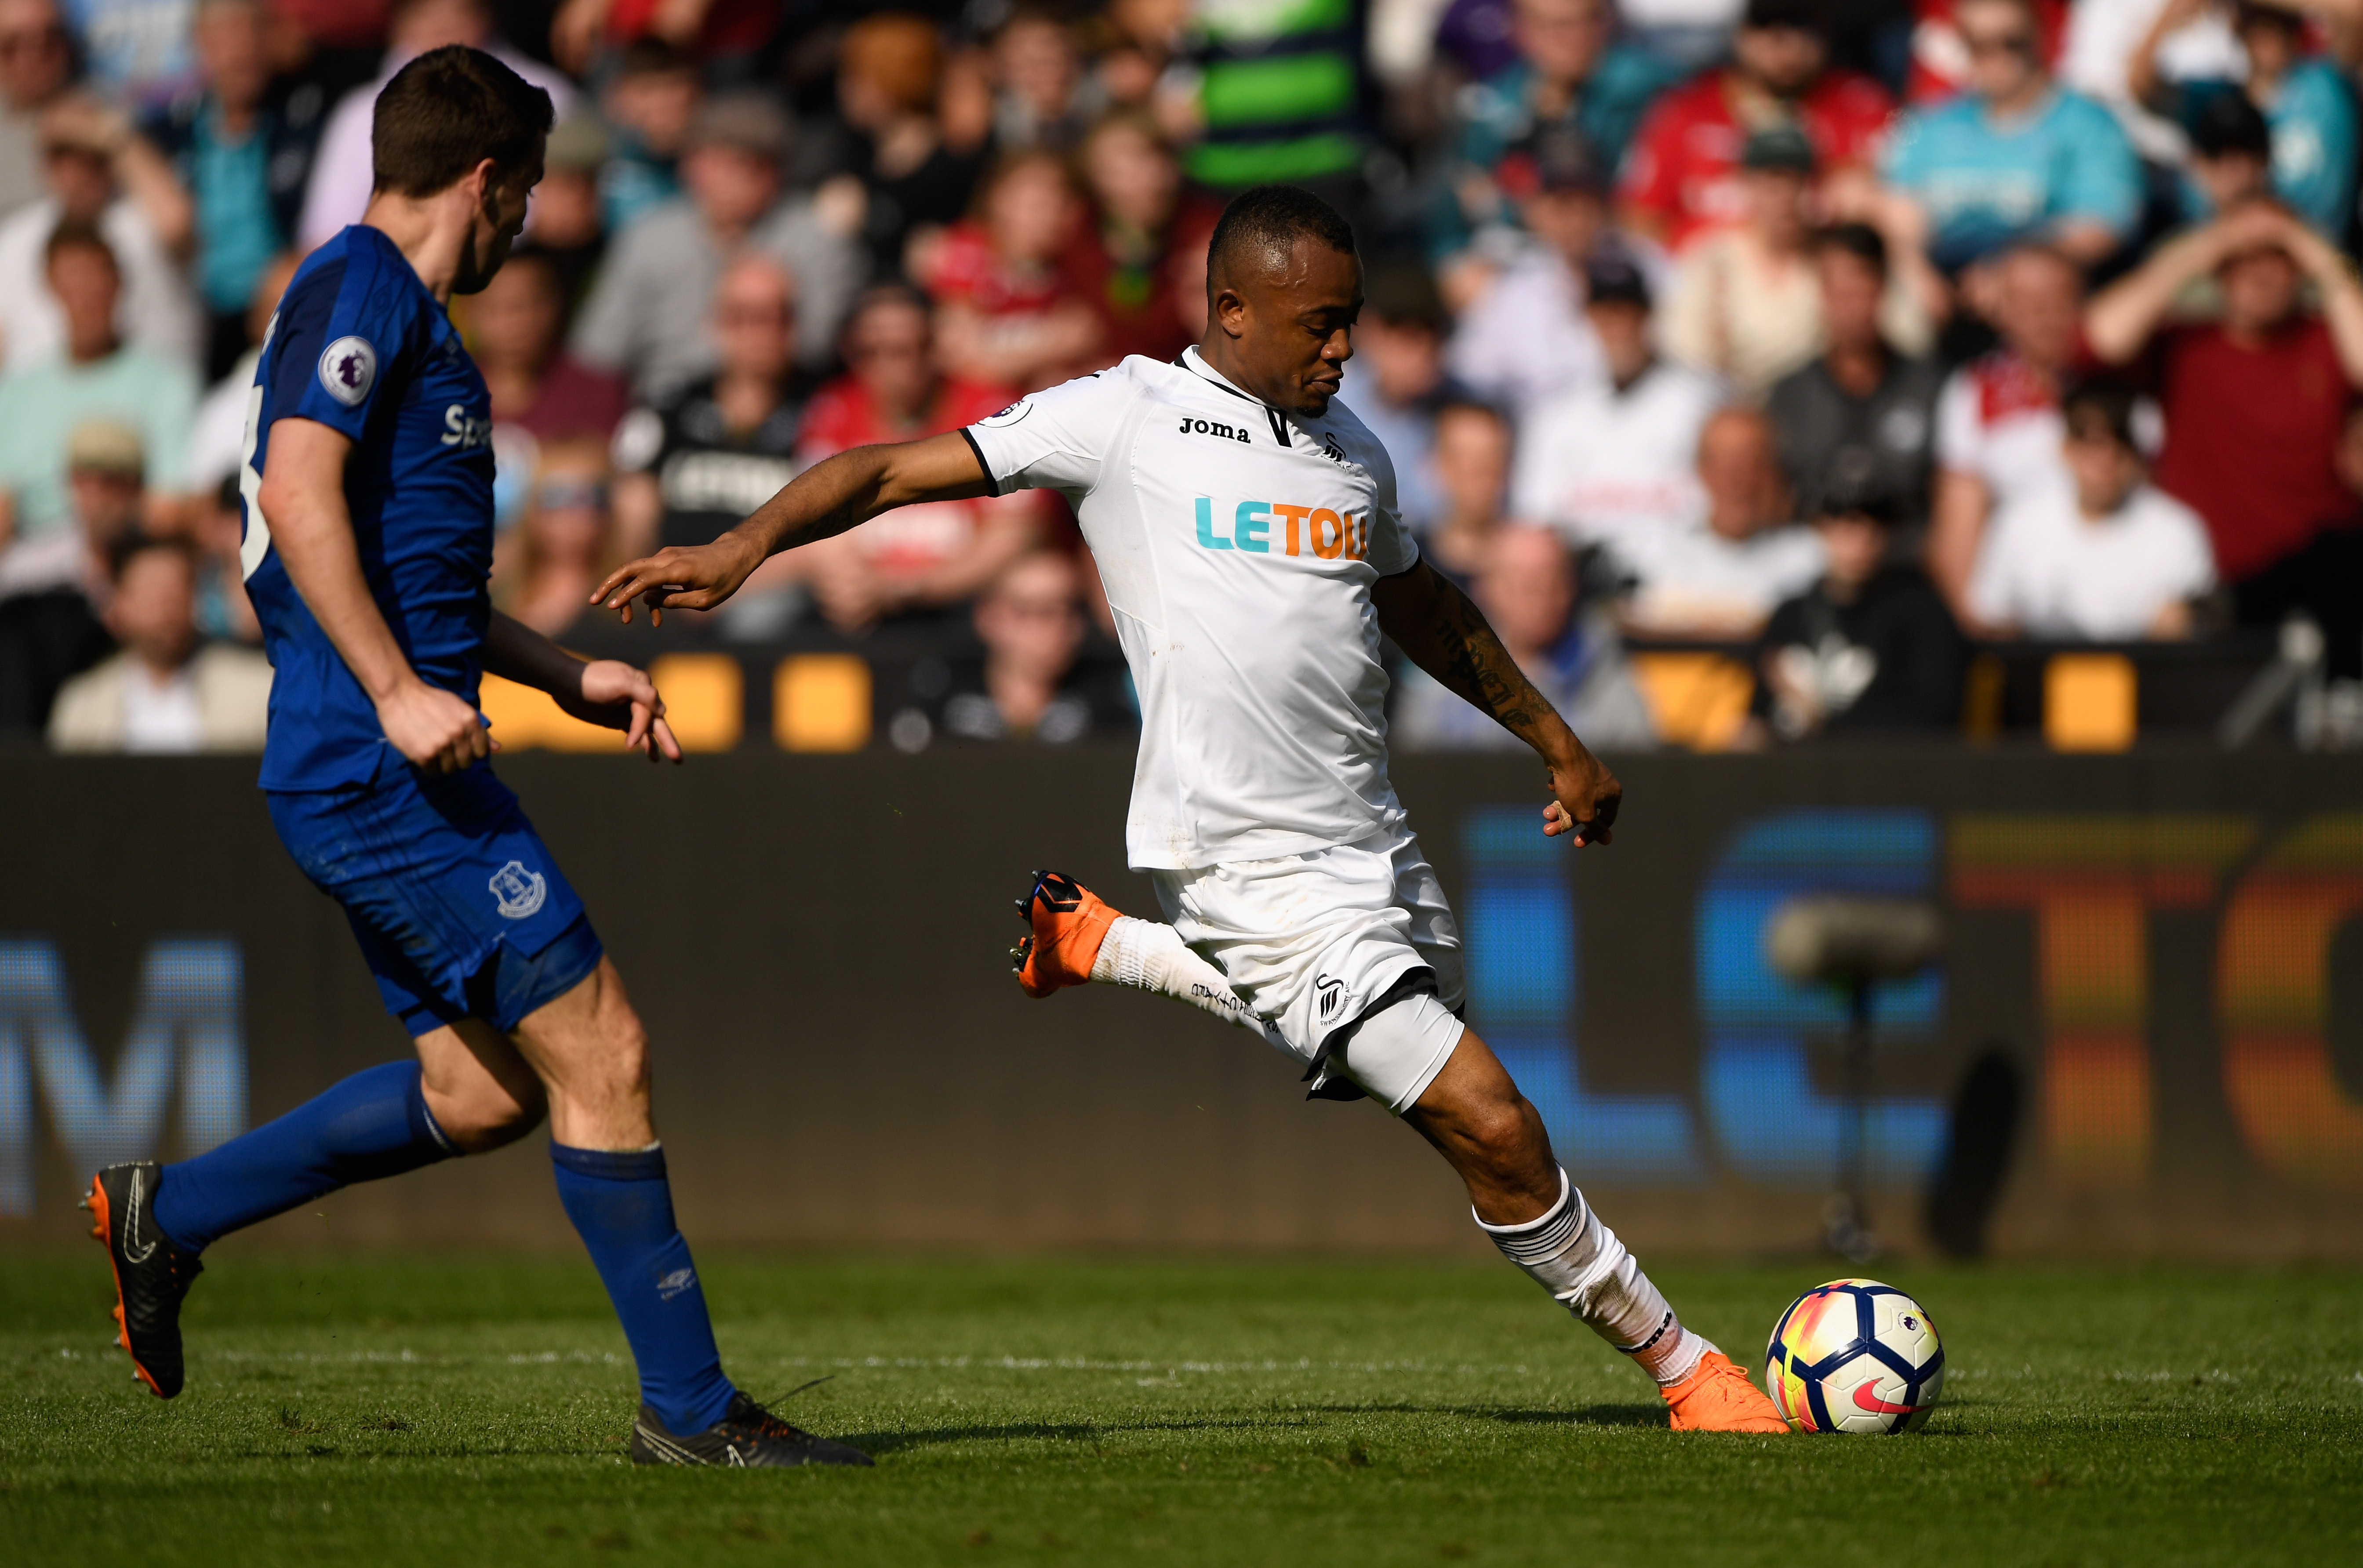 SWANSEA, WALES - APRIL 14:  Swansea player Jordan Ayew shoots at goal despite the challenge of Phil Jagielka during the Premier League match between Swansea City and Everton at Liberty Stadium on April 14, 2018 in Swansea, Wales.  (Photo by Stu Forster/Getty Images)